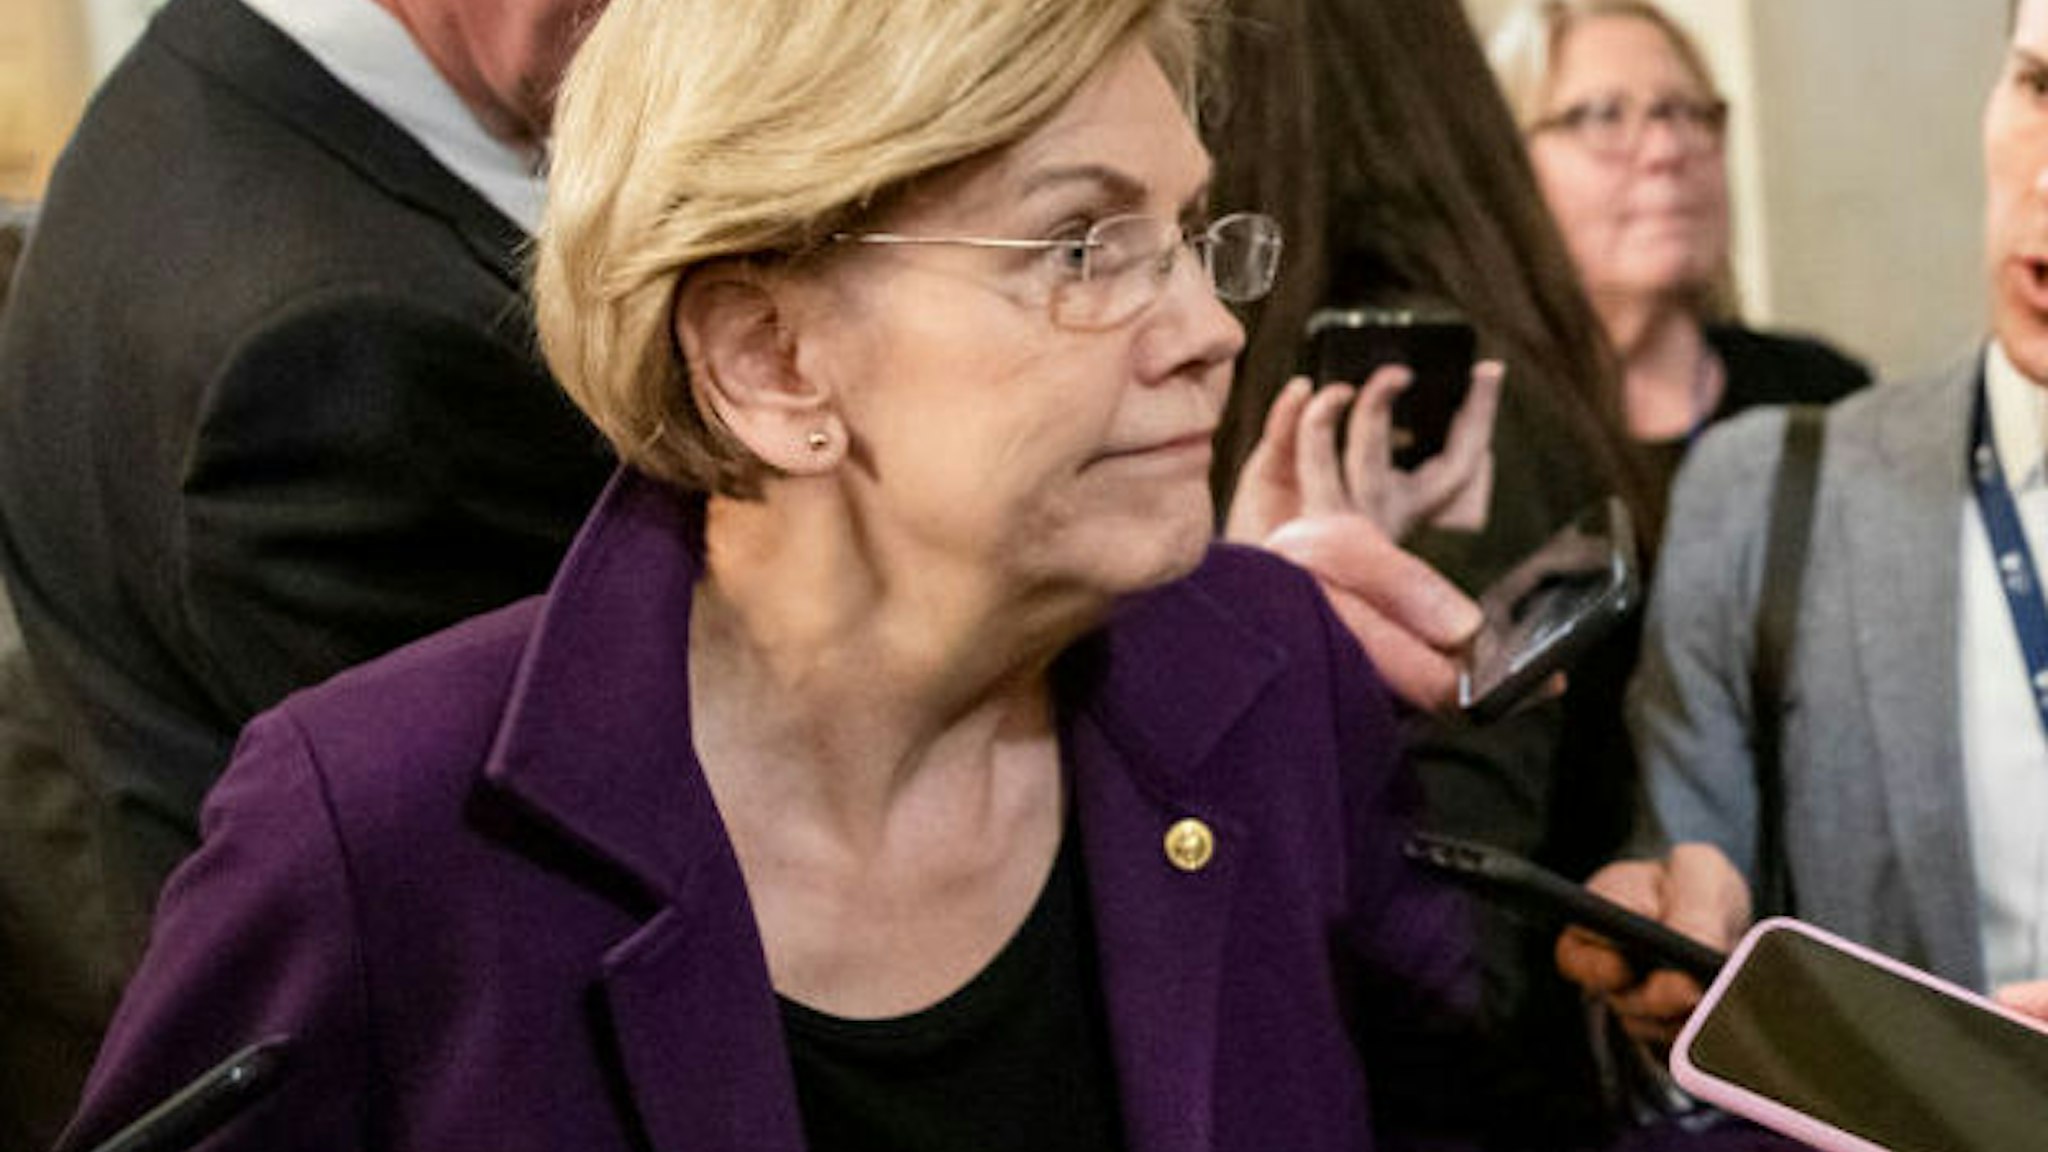 WASHINGTON, DC - JANUARY 27: Democratic Presidential Candidate Senator Elizabeth Warren answers questions from the press as she leaves after the Senate impeachment trial of President Donald Trump was adjourned for the day on January 27, 2020 in Washington, DC. The defense team continues its arguments on the sixth day of the Senate impeachment trial of President Trump. It has been reported that Senator Pat Toomey has been discussing that a "one-for-one" witness deal be proposed to Senate Democrats after the Presidents legal defense team concludes their opening arguments on Tuesday.